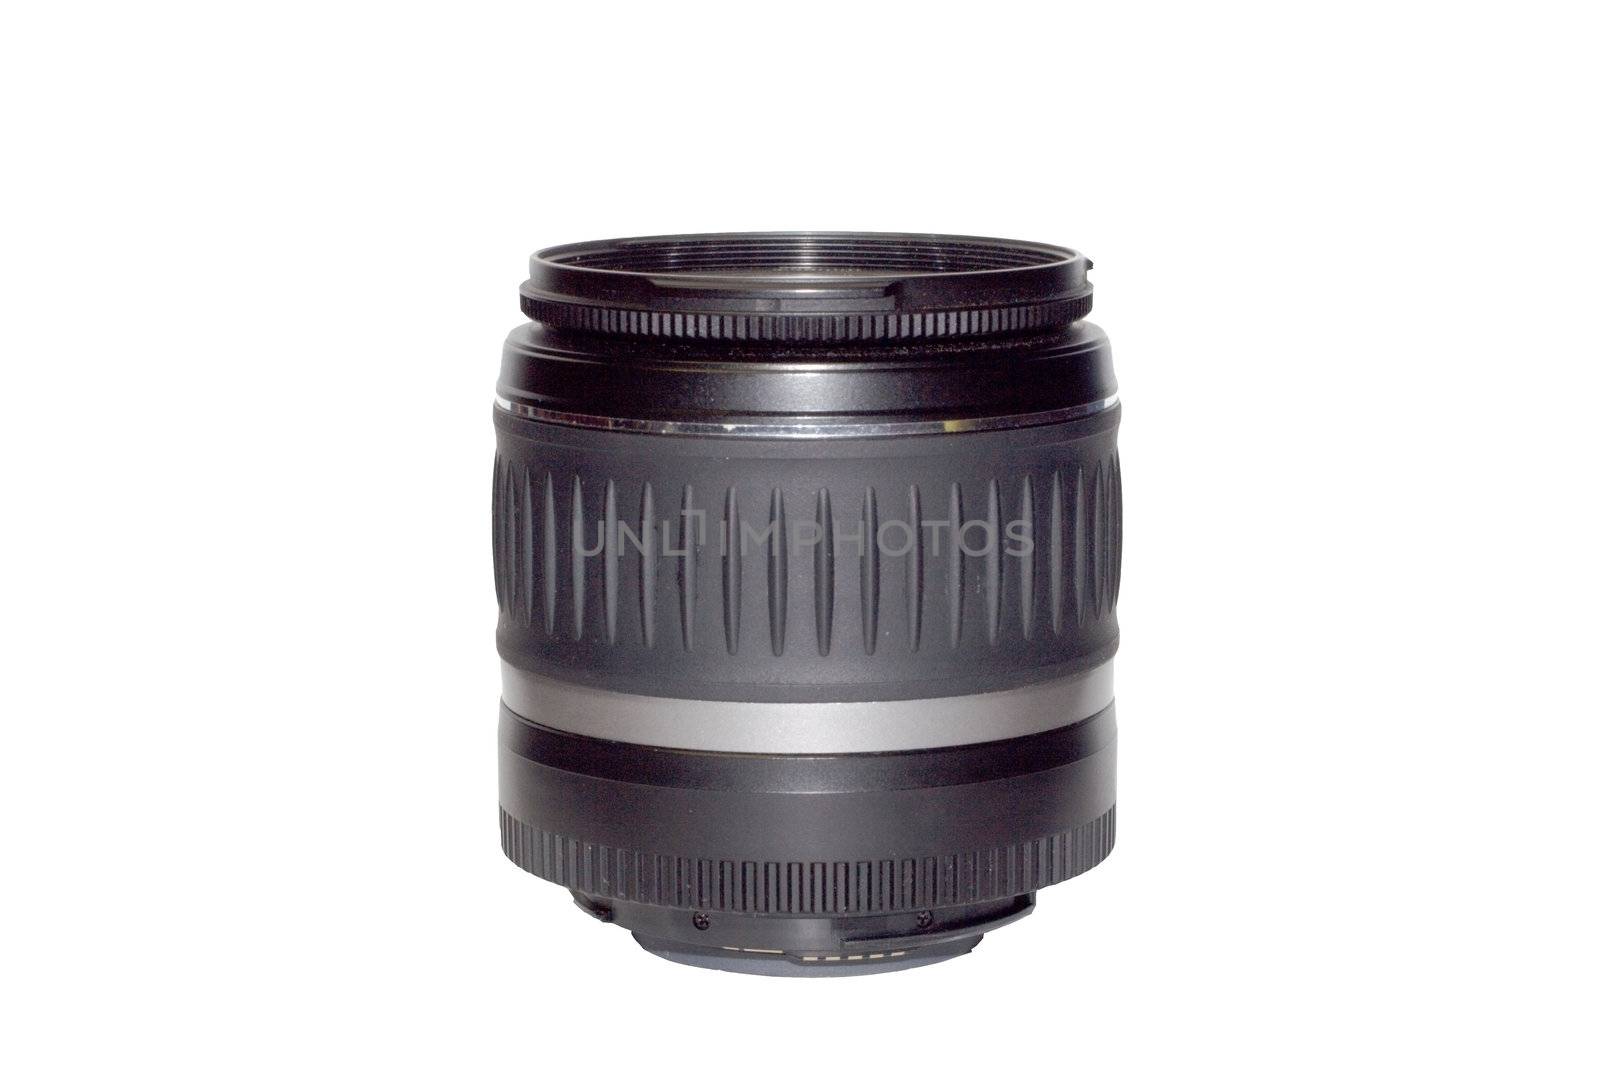 black zoom lens for camera isolated on white